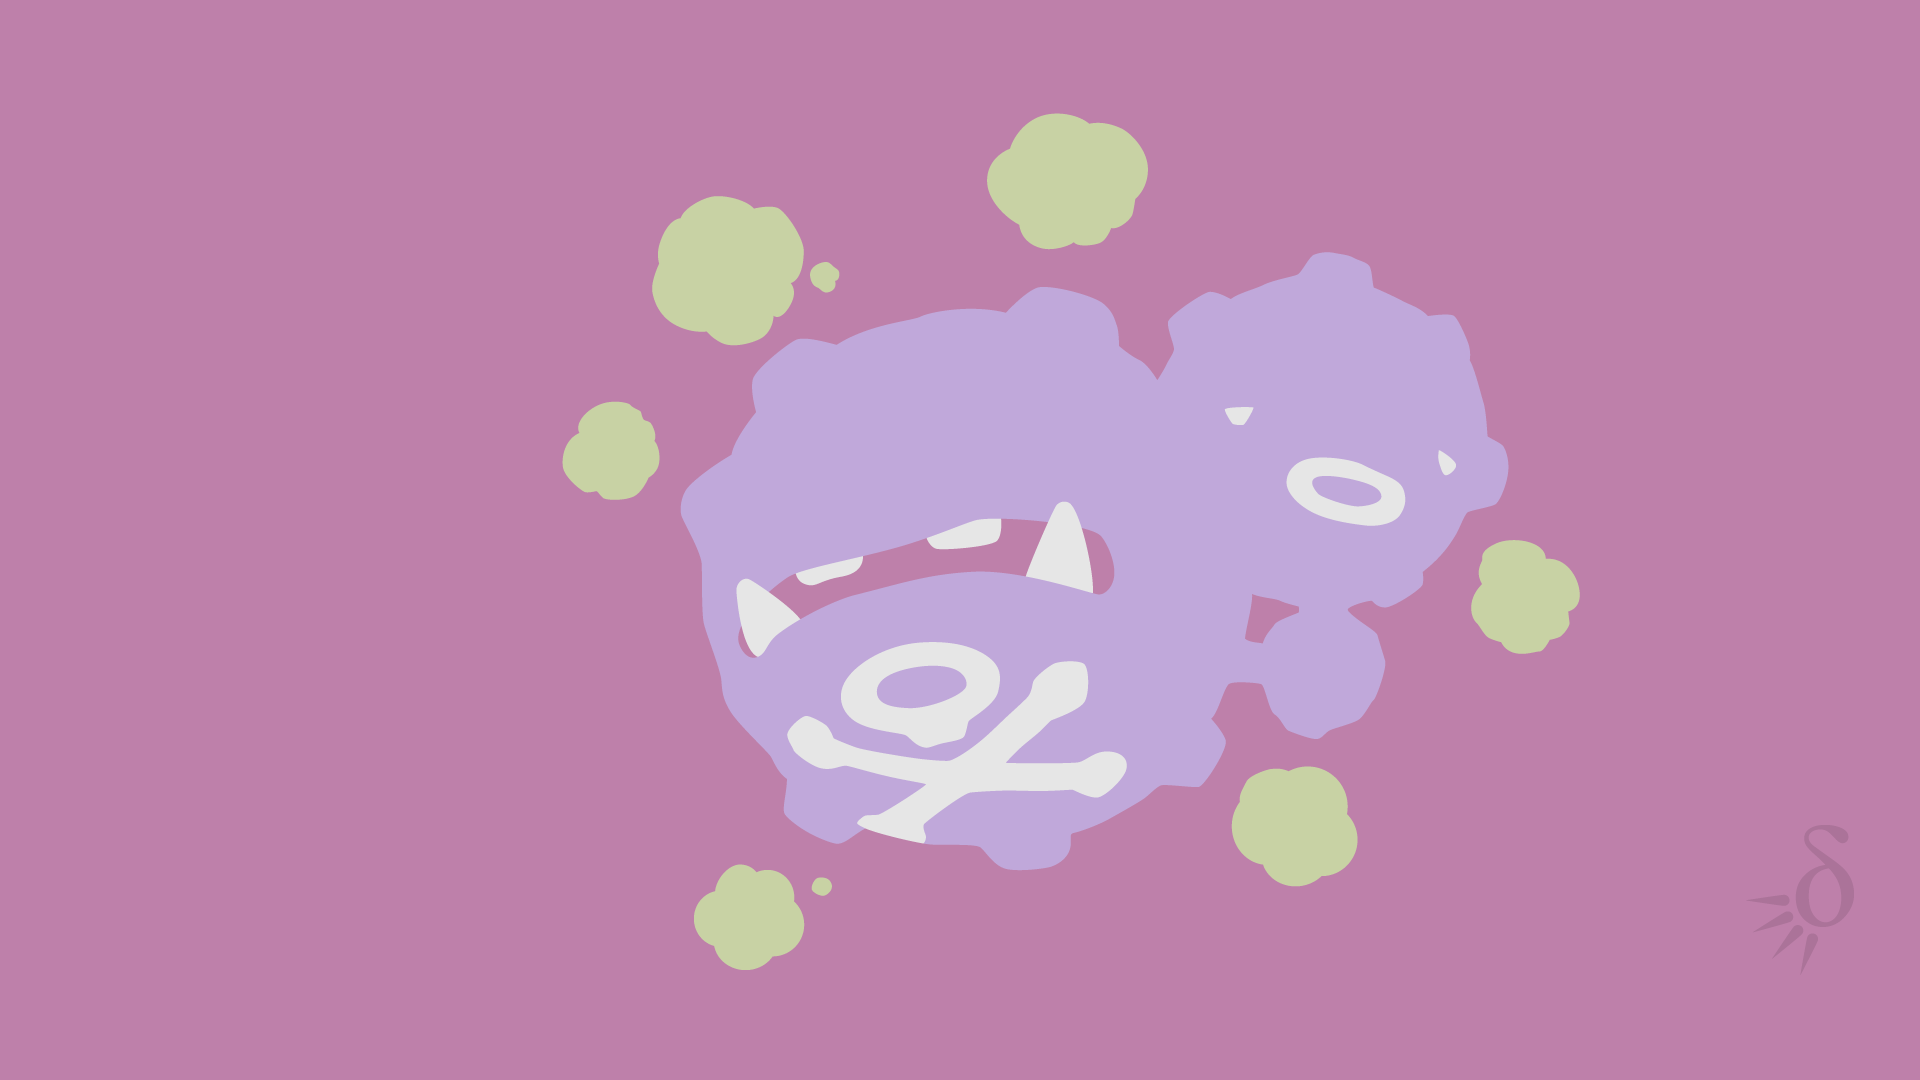 Weezing Hd Wallpapers